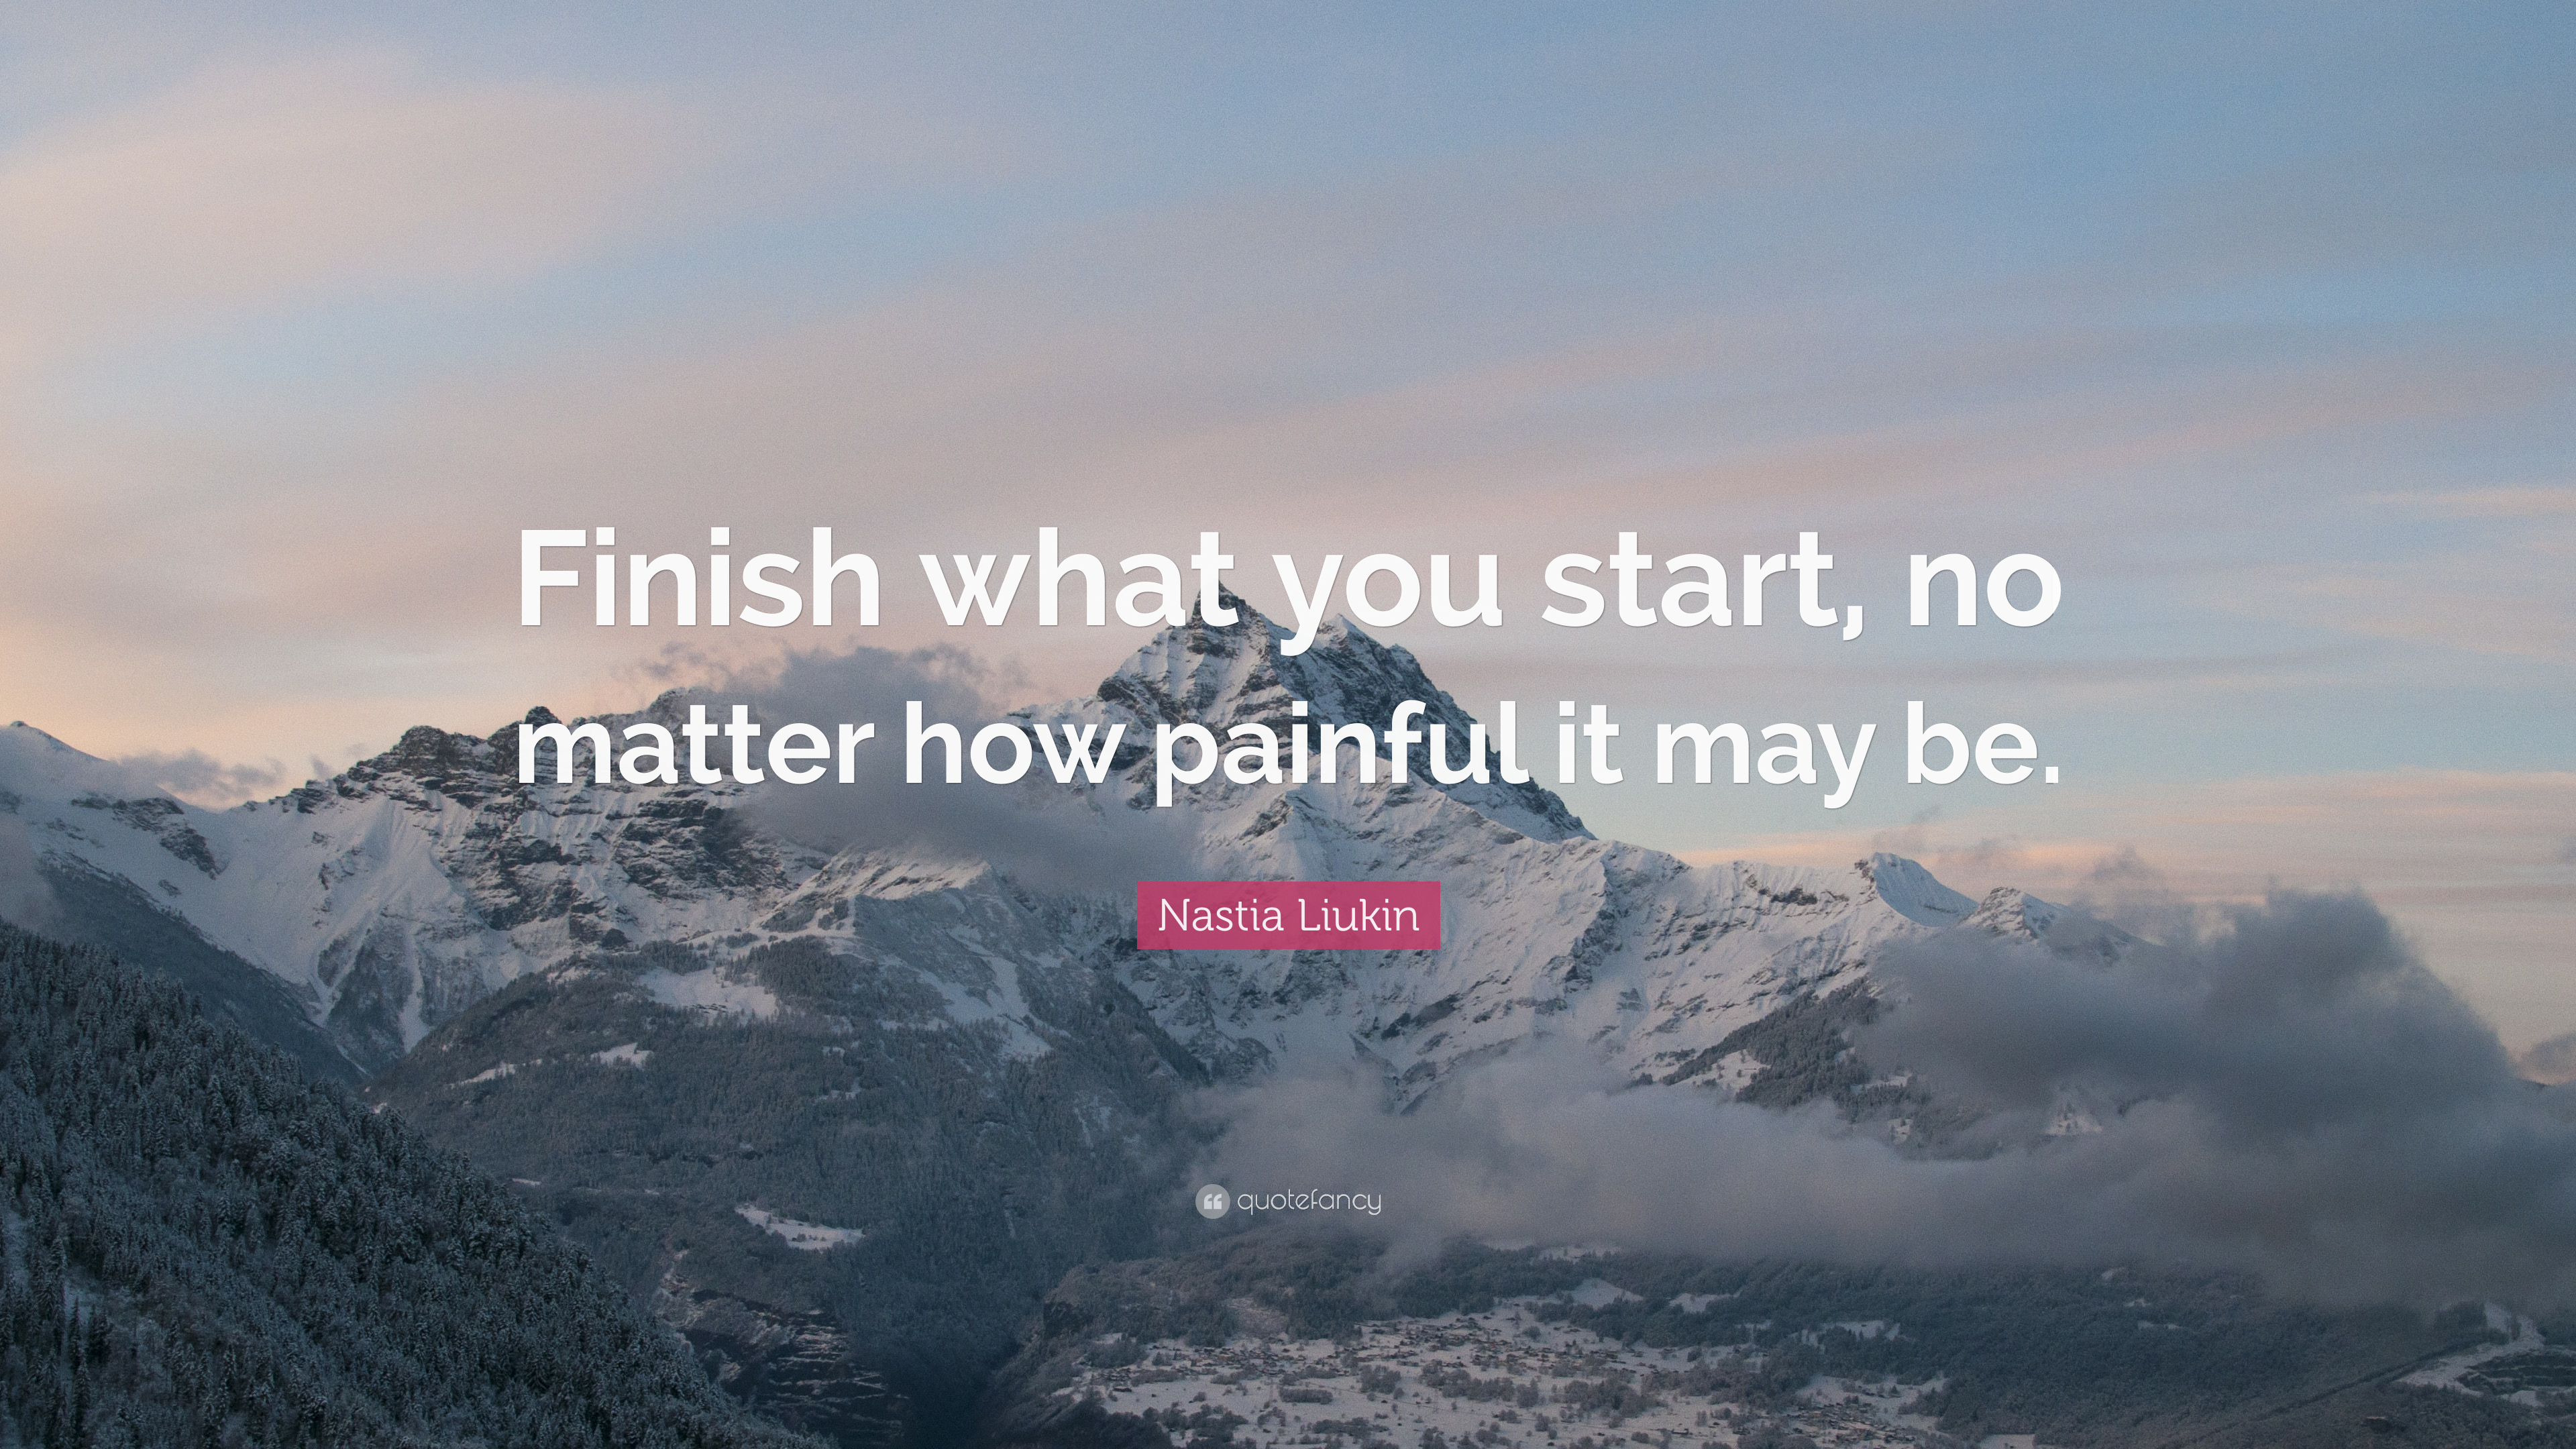 Nastia Liukin Quote: “Finish what you start, no matter how painful it may be.”